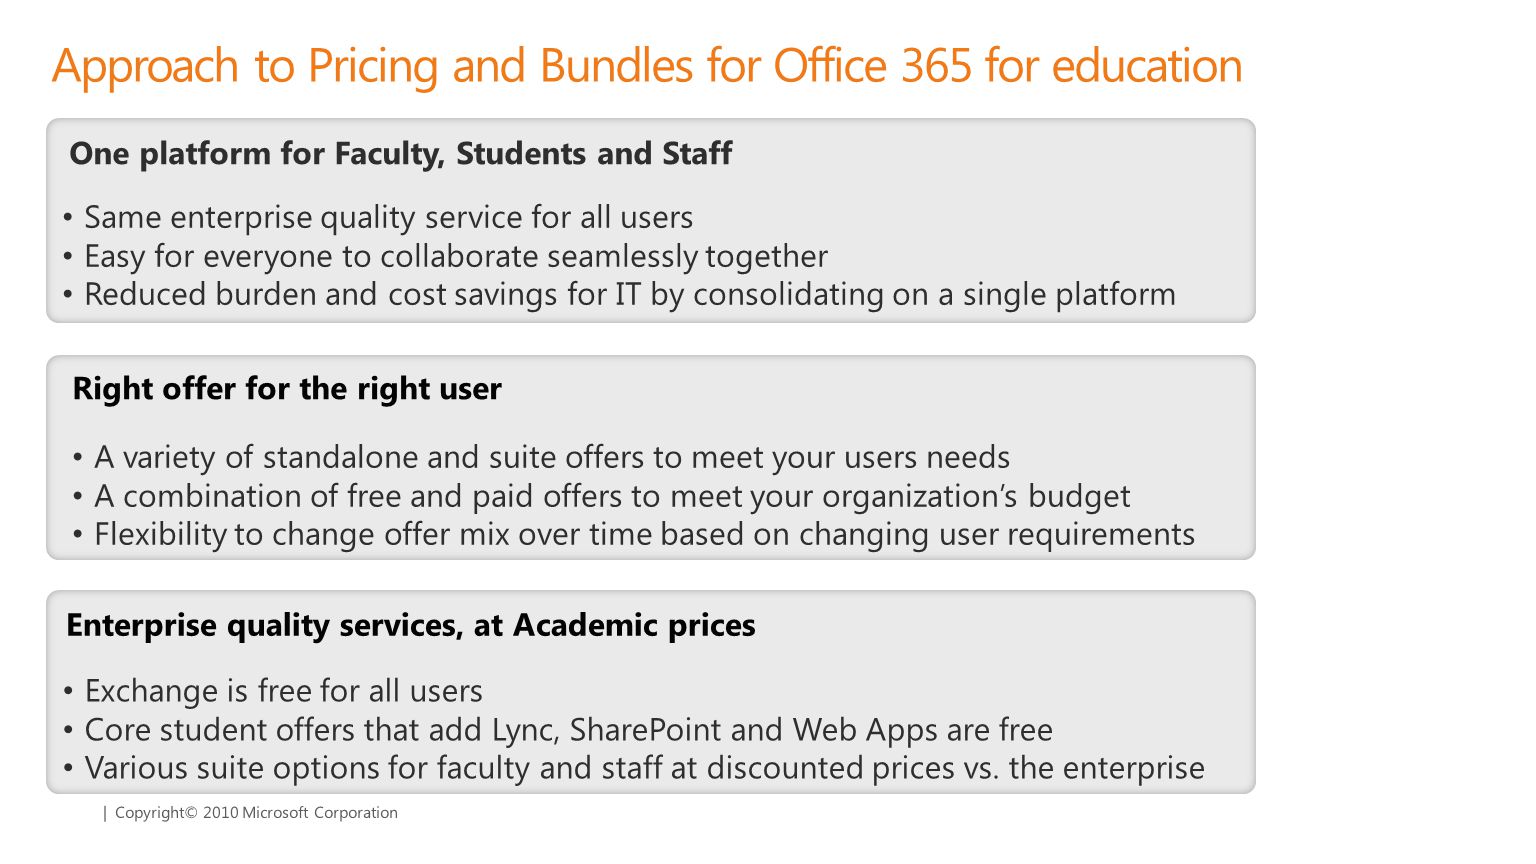 | Copyright© 2010 Microsoft Corporation Enterprise quality services, at Academic prices Right offer for the right user One platform for Faculty, Students and Staff Approach to Pricing and Bundles for Office 365 for education Exchange is free for all users Core student offers that add Lync, SharePoint and Web Apps are free Various suite options for faculty and staff at discounted prices vs.